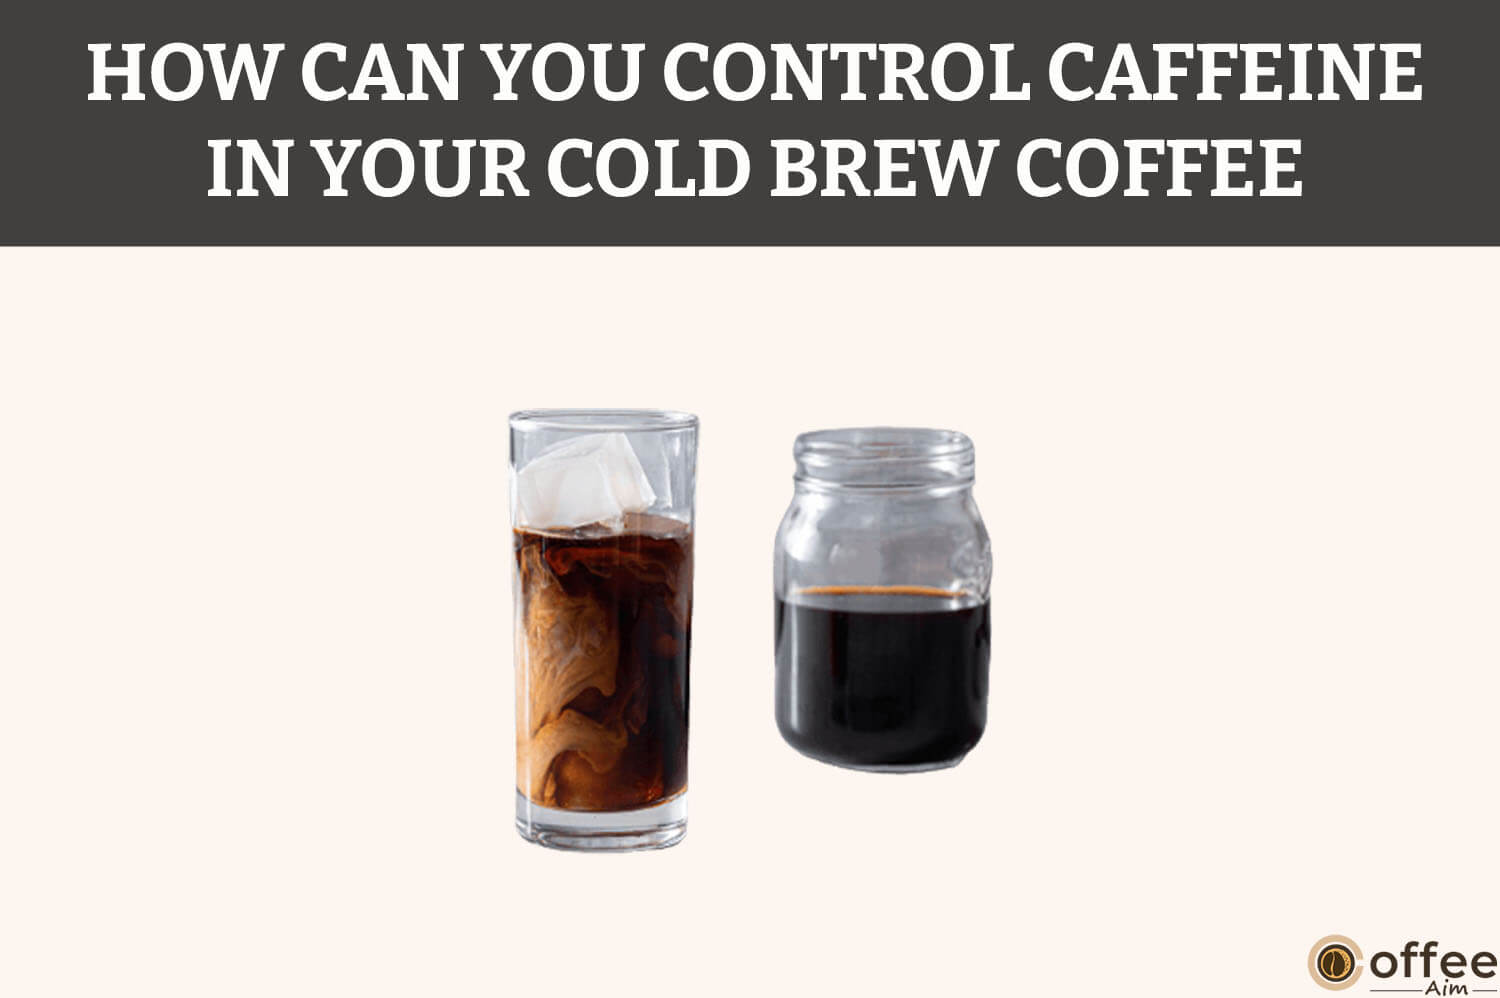 Featured image for the article "How Can You Control Caffeine in Your Cold Brew Coffee"